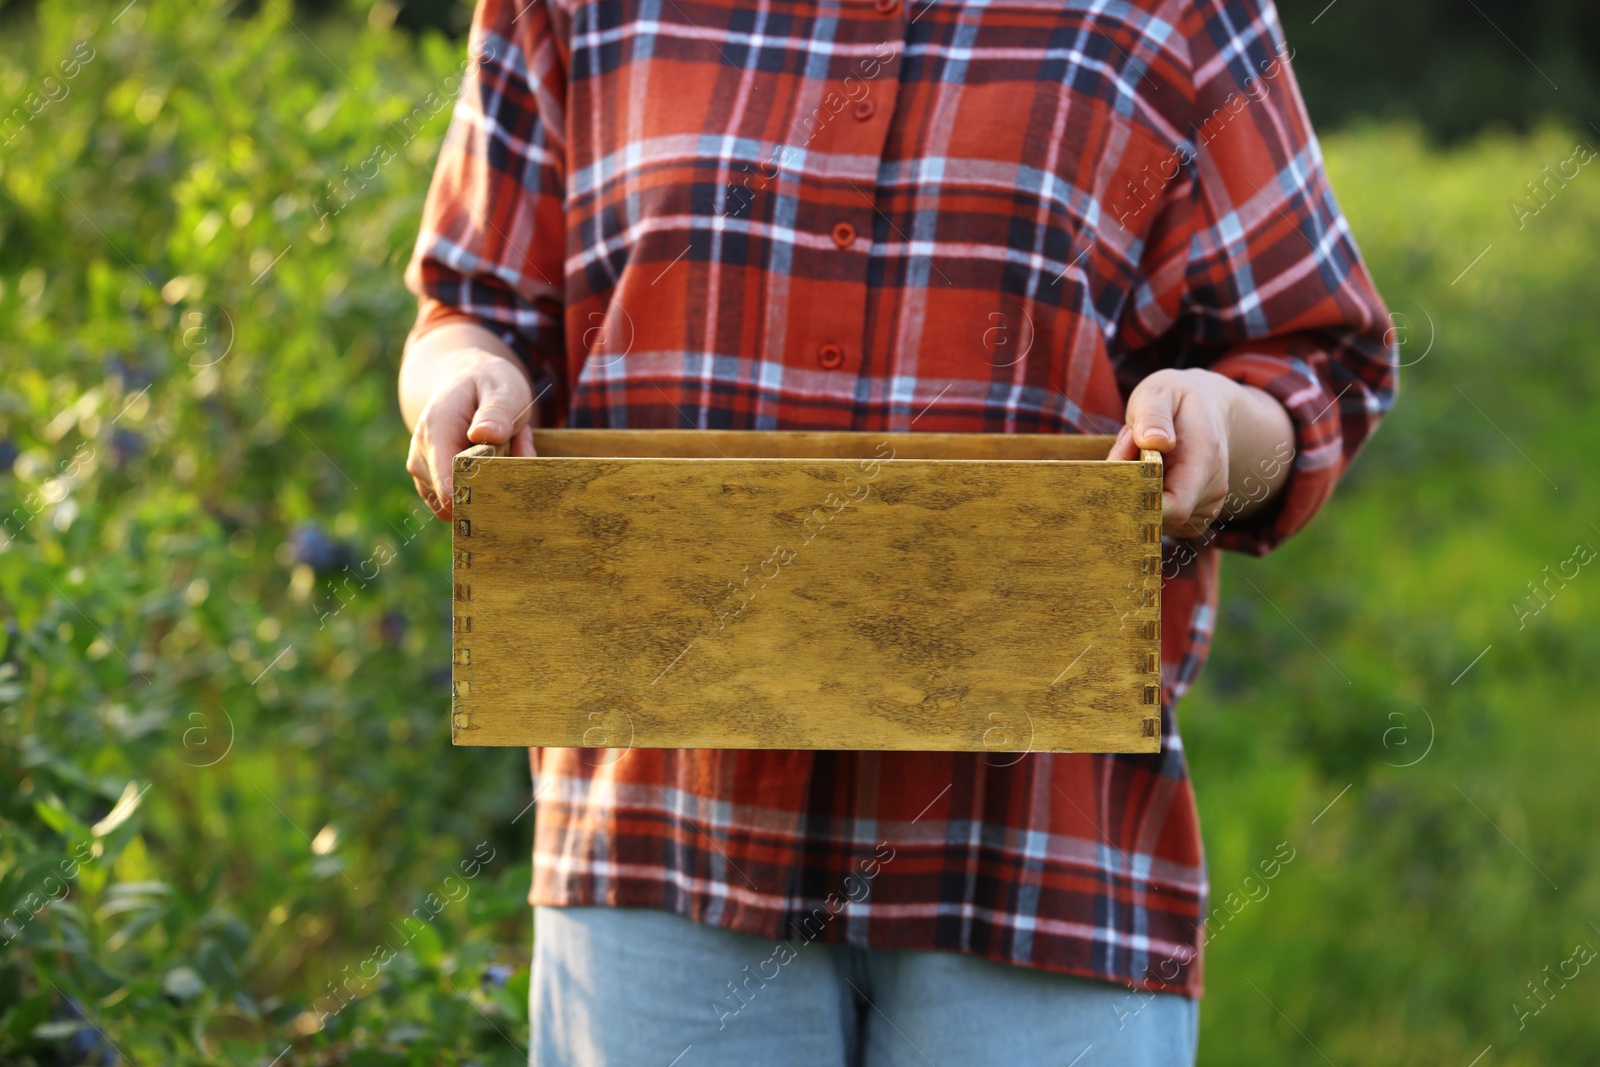 Photo of Woman holding wooden box outdoors, closeup view